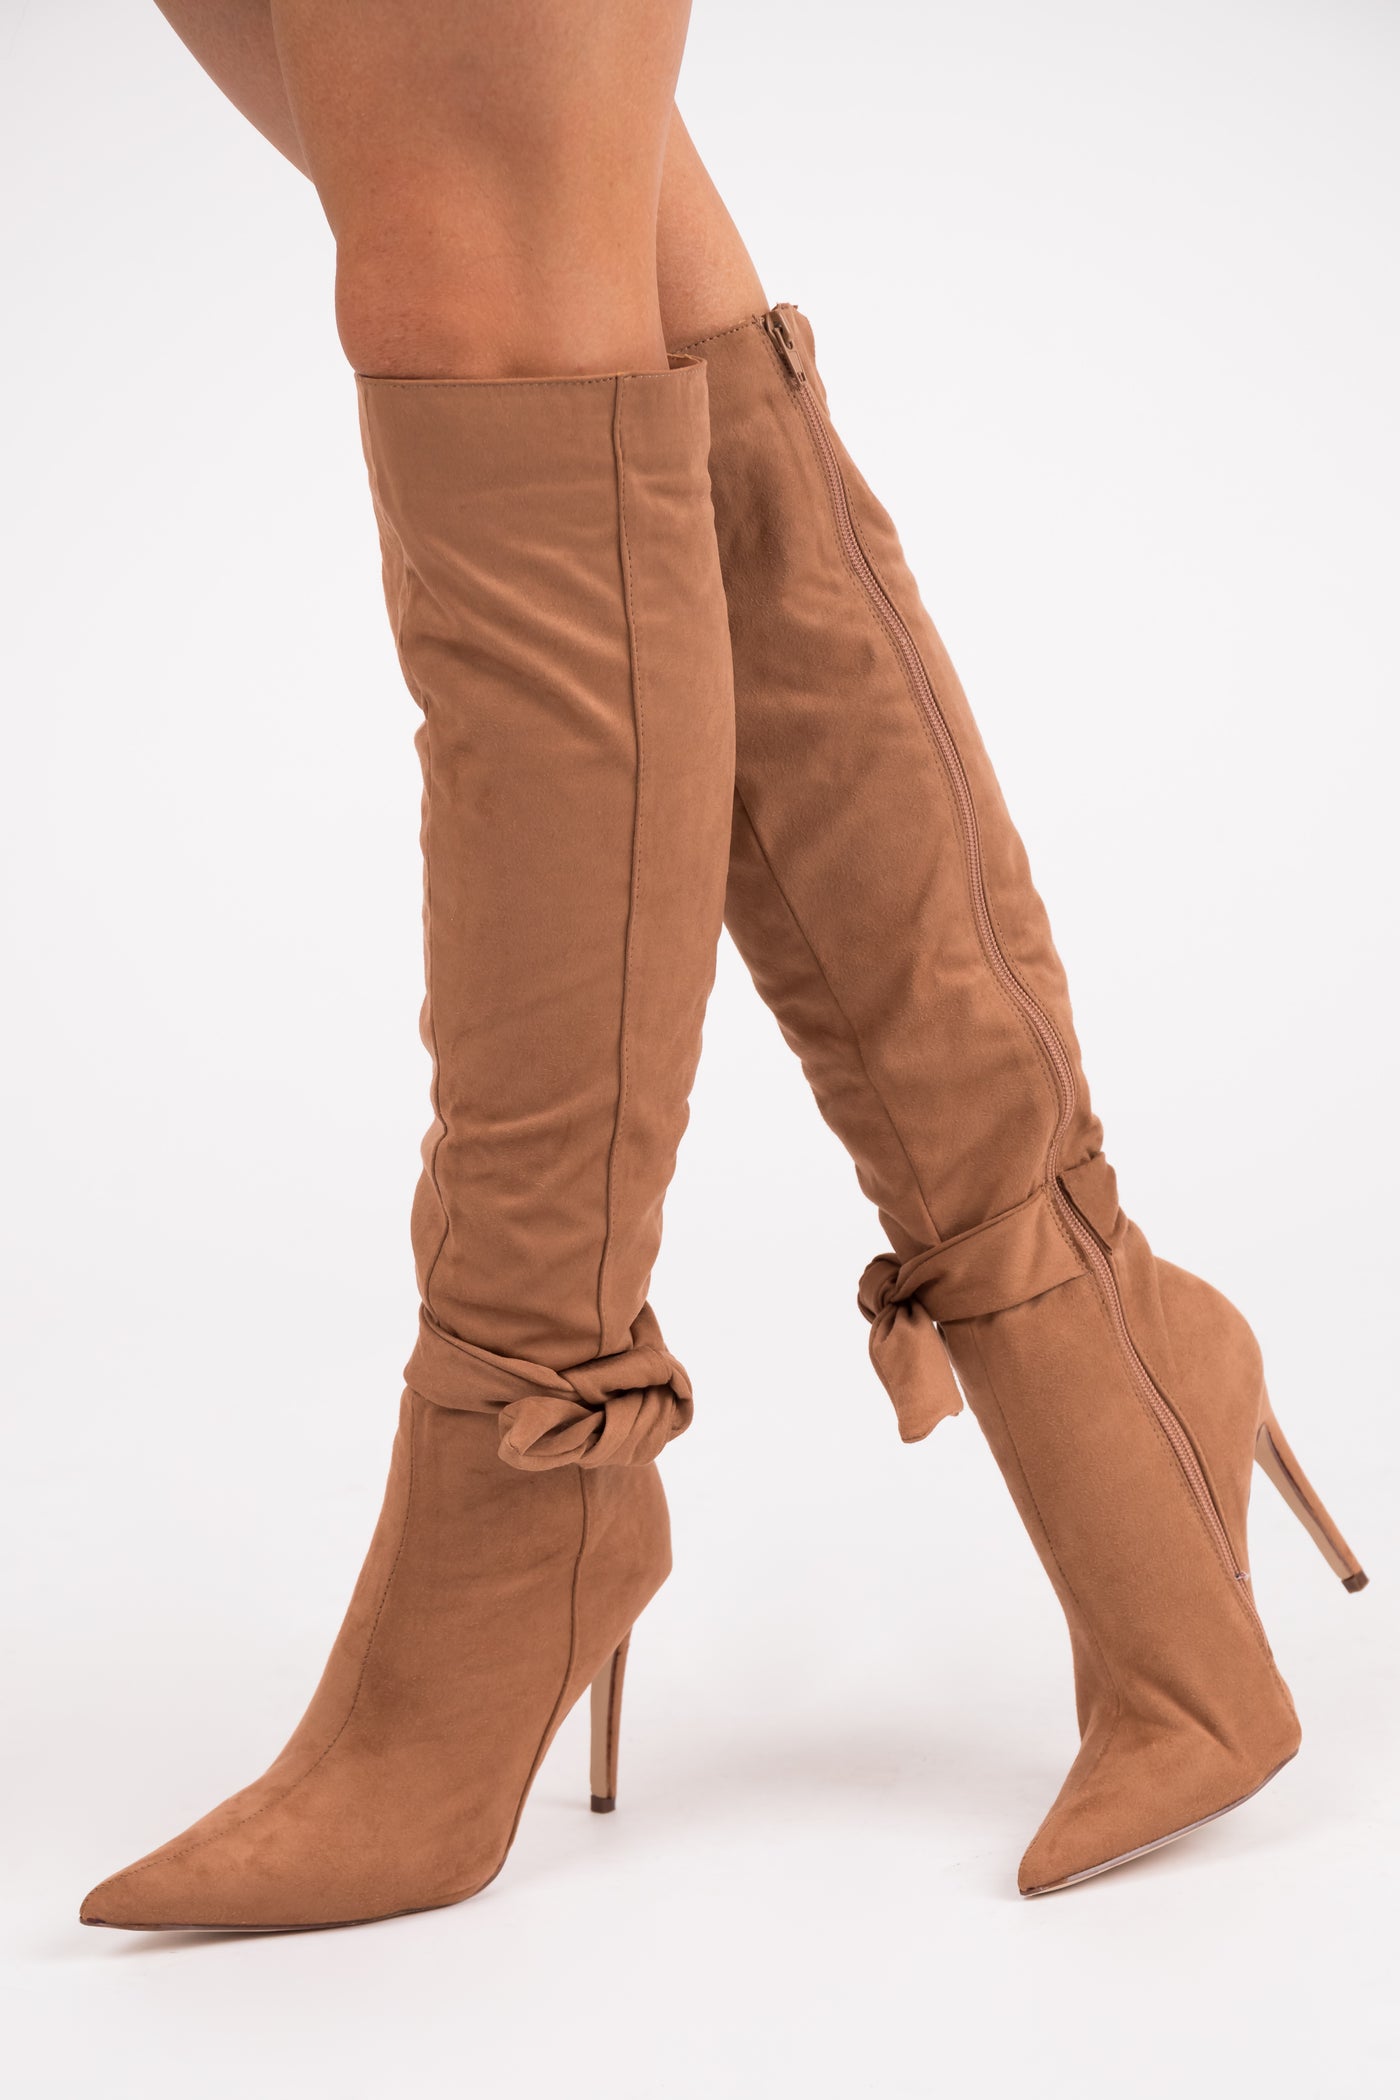 Copper Heeled Knee High Side Bow Detail Boots